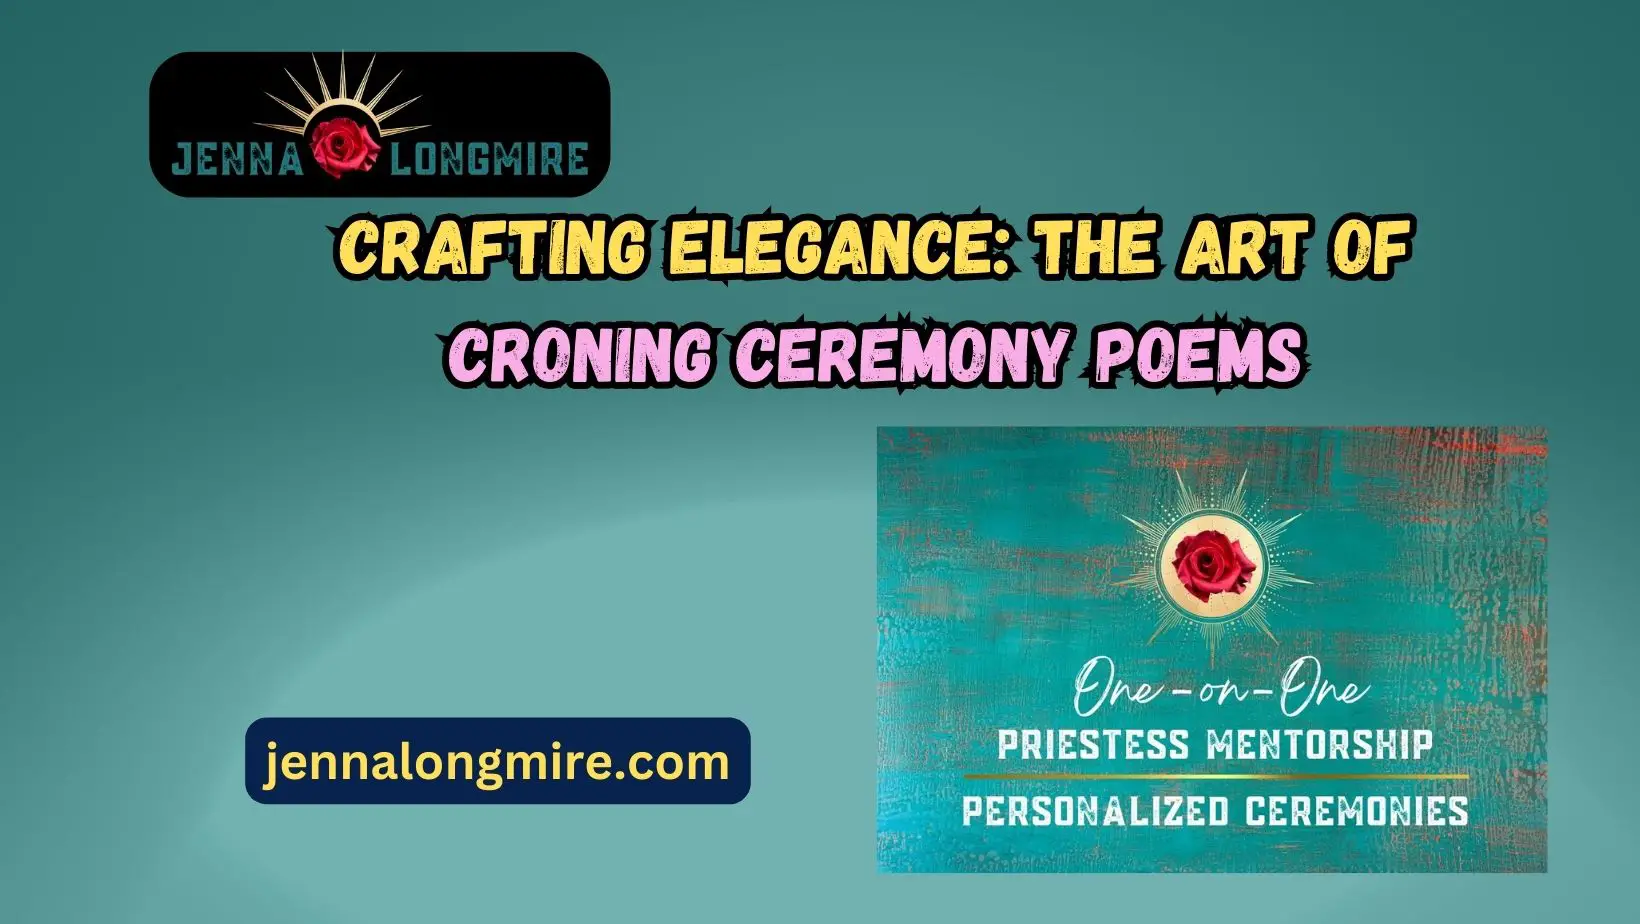 Crafting Elegance The Art of Croning Ceremony Poems